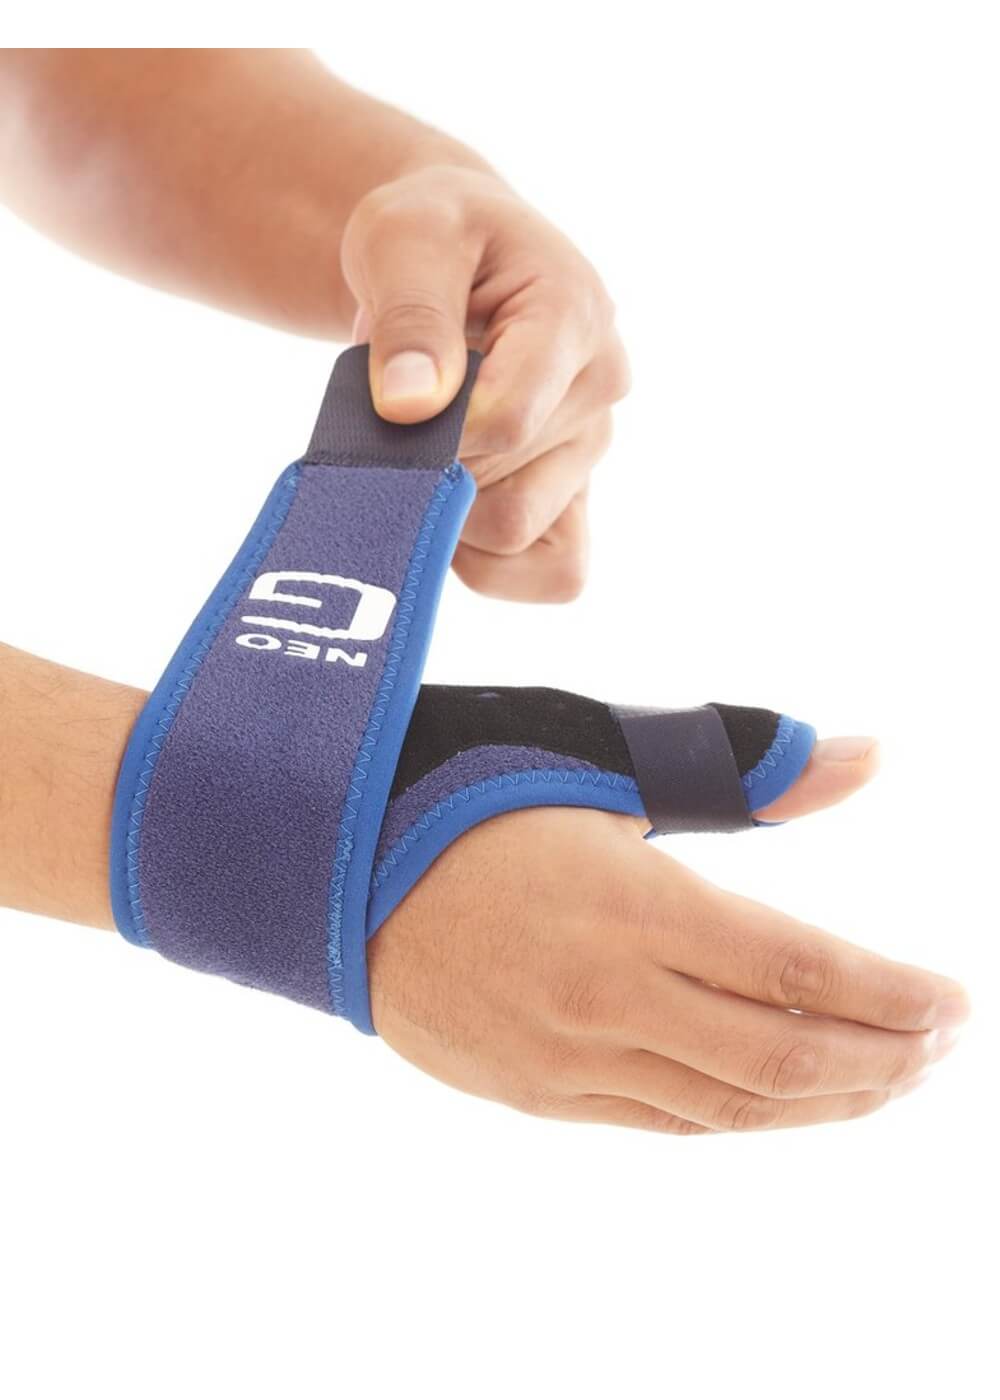 neo g adjustable thumb stabilizer